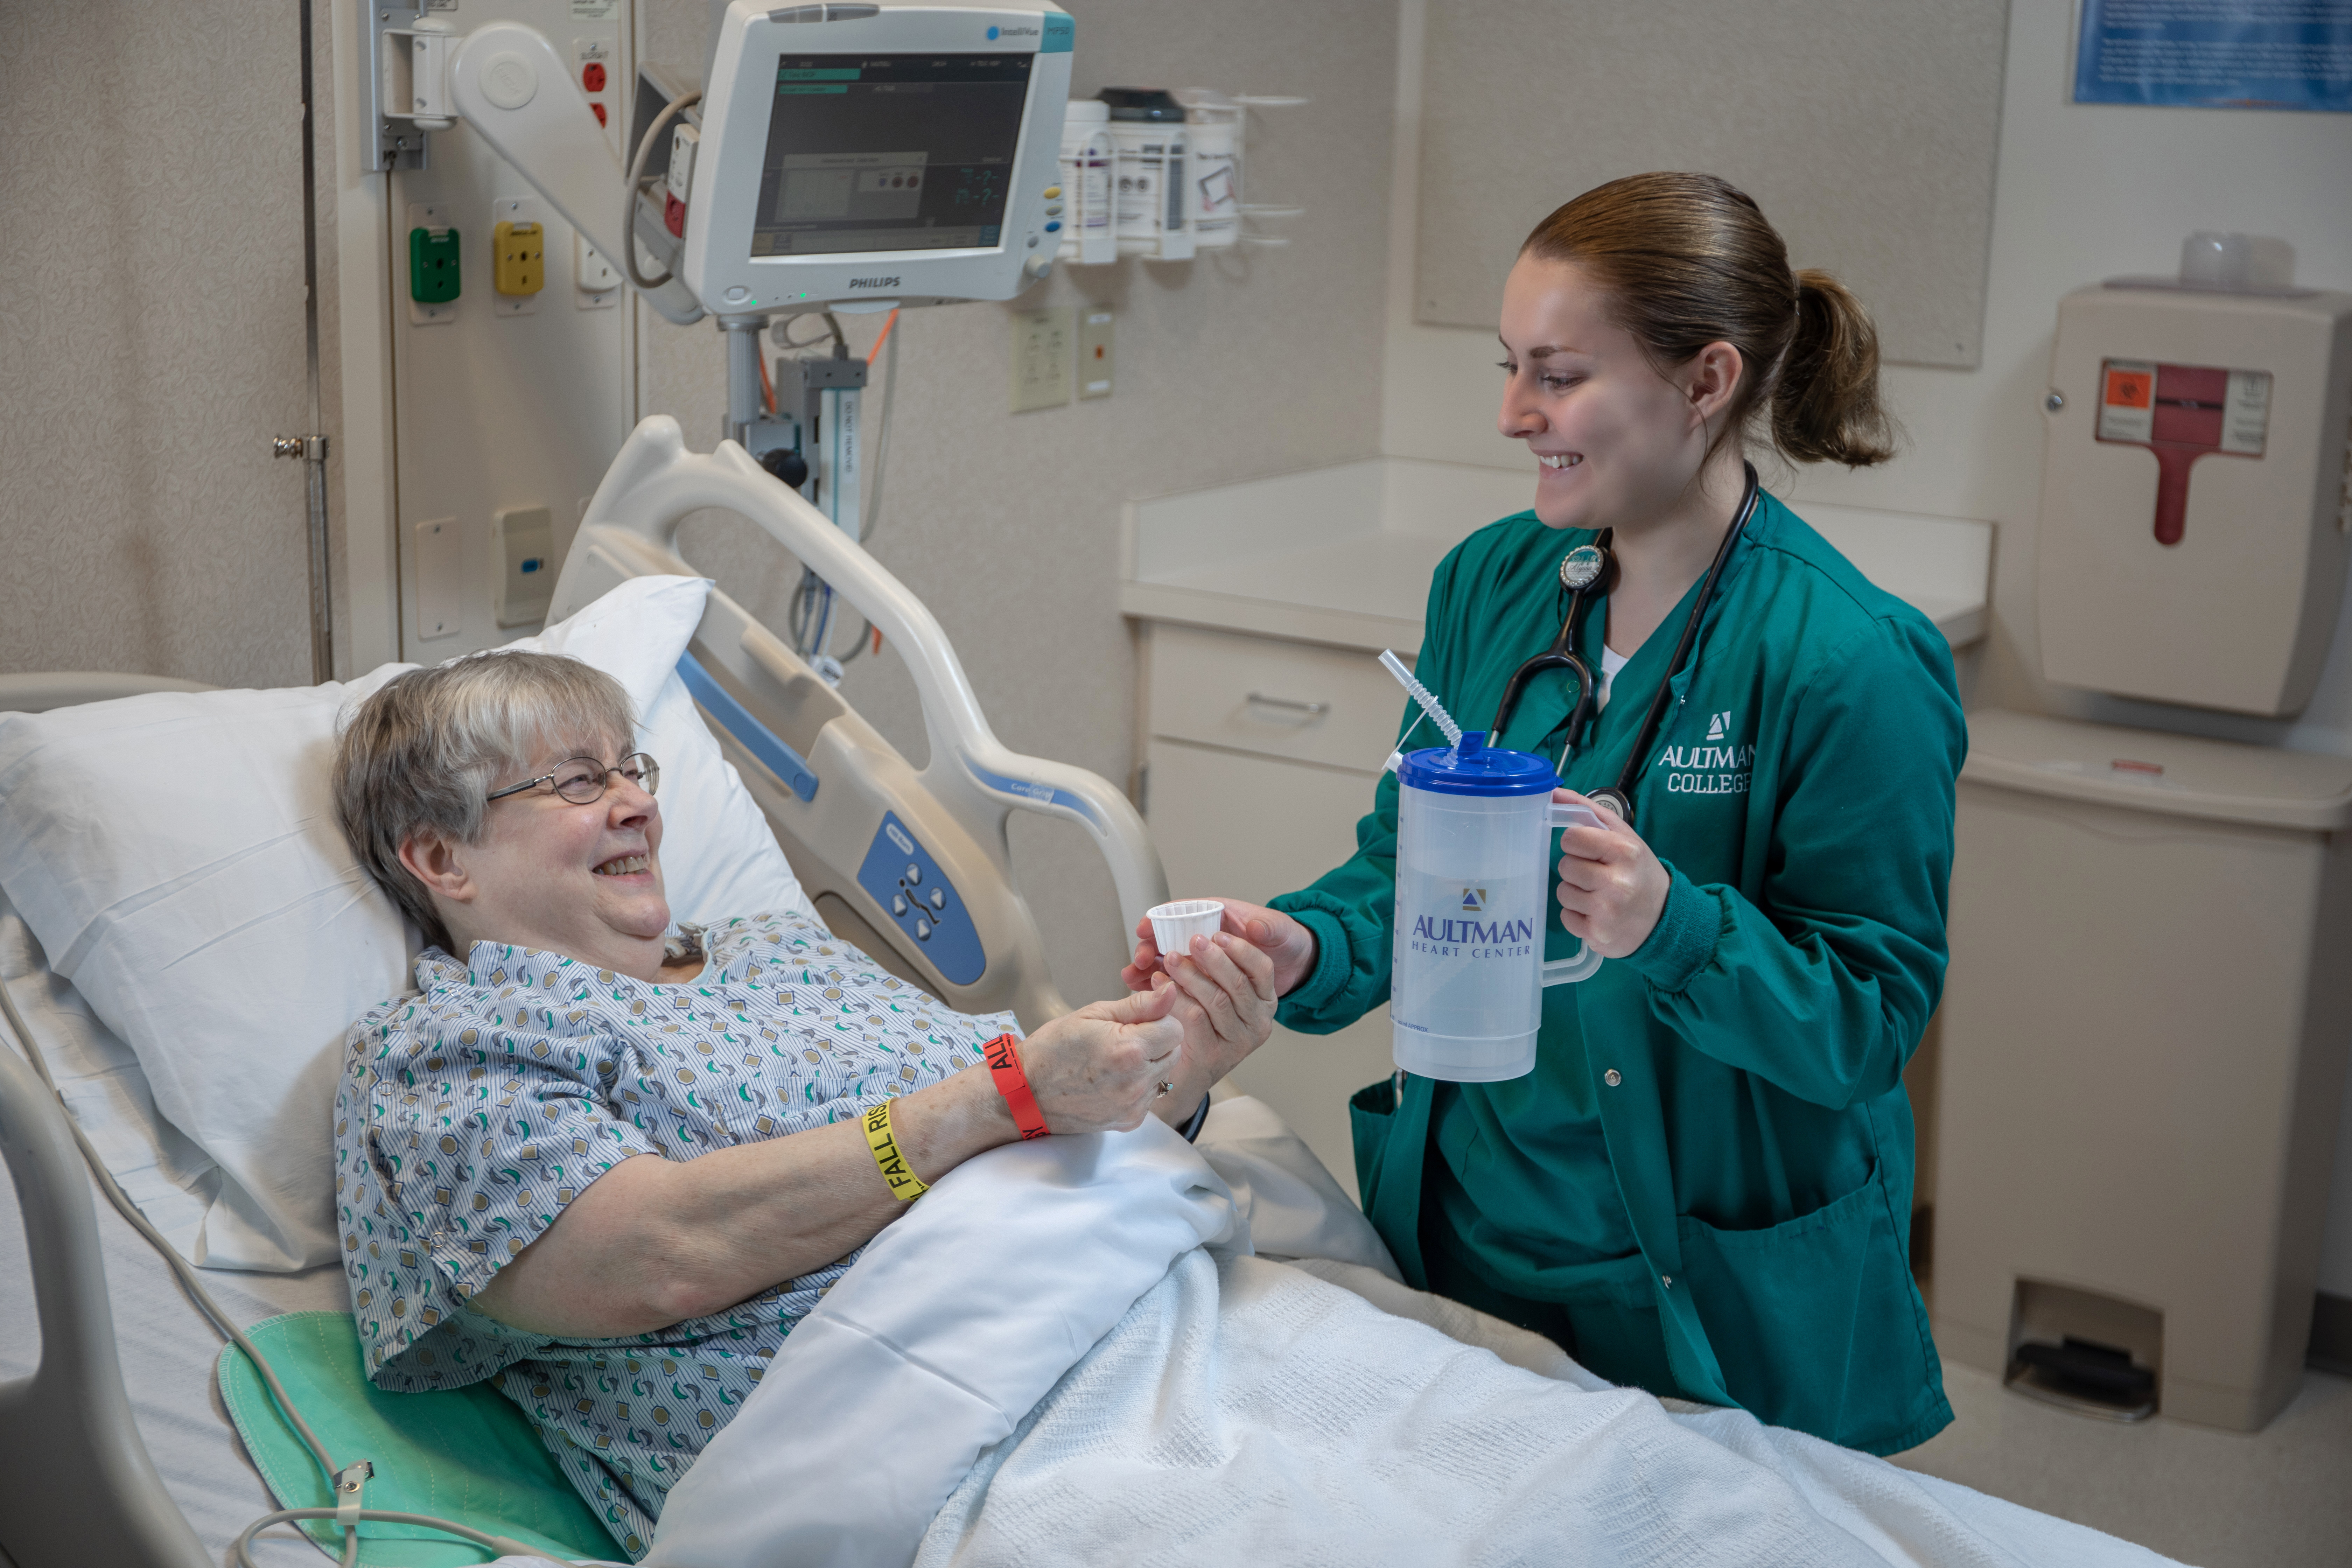 RN nursing program student interacts with a patient during training